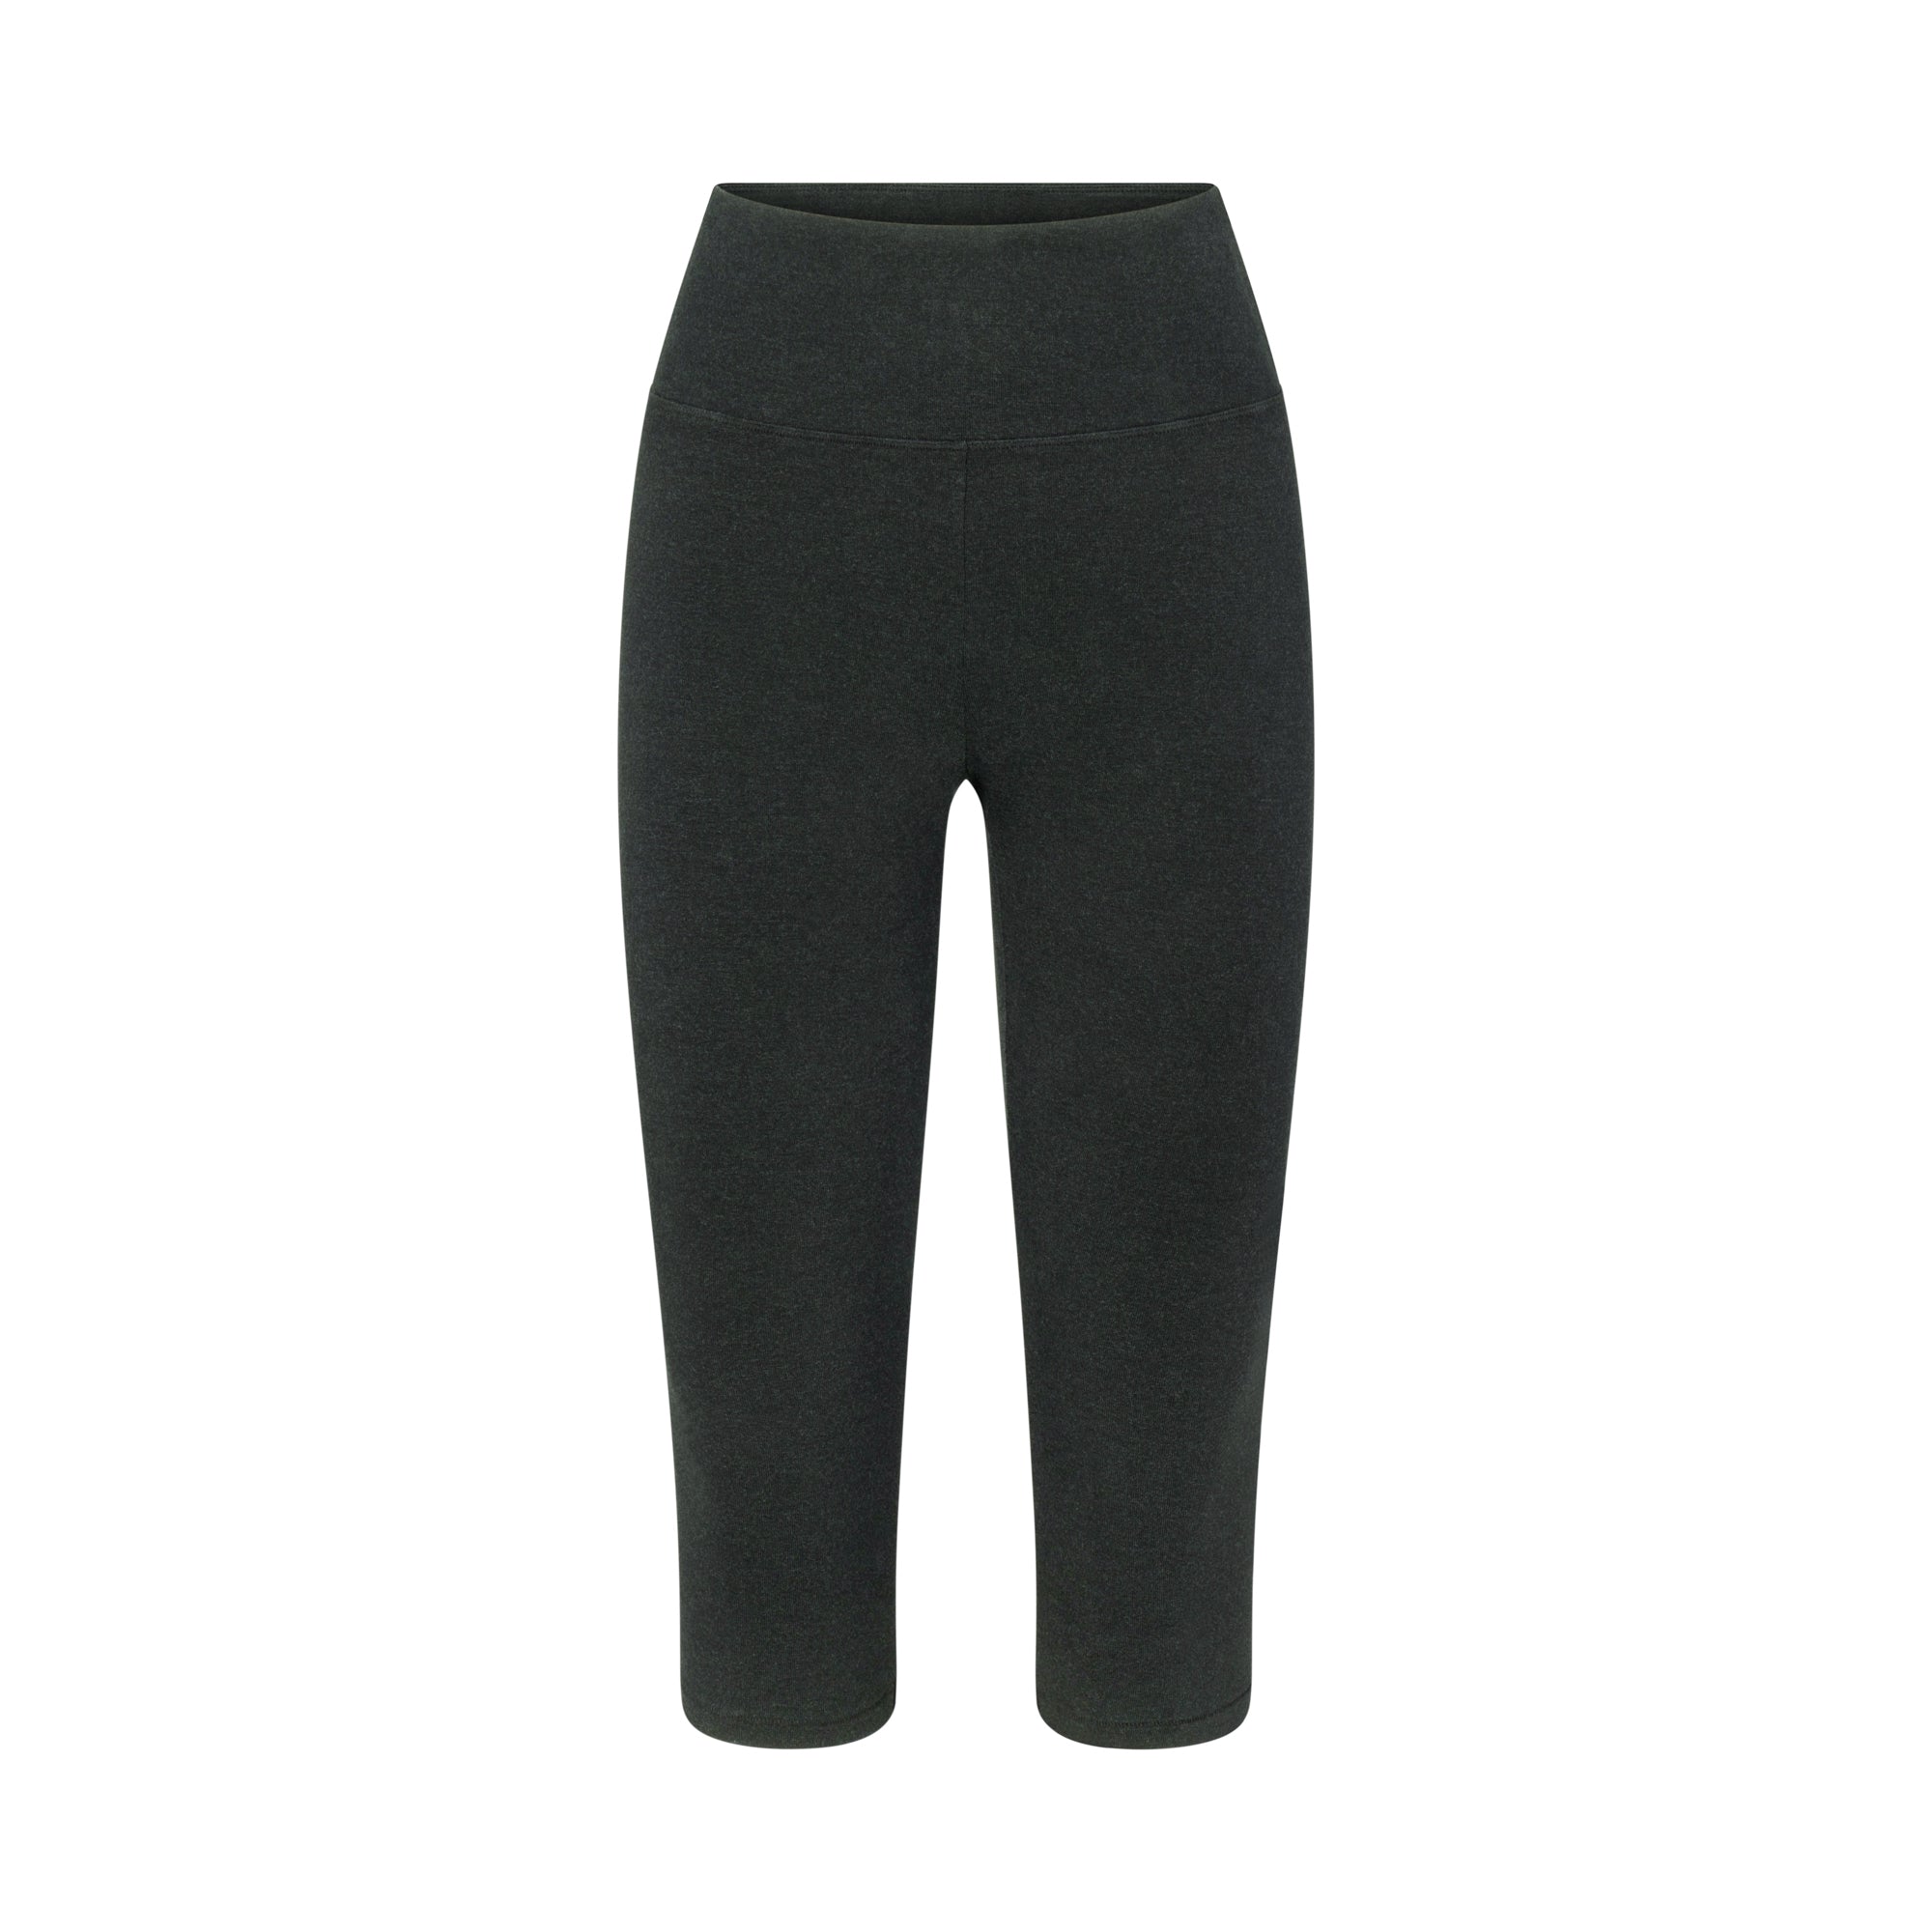 OUTDOOR CROPPED LEGGING | WASHED ONYX - OUTDOOR CROPPED LEGGING ...